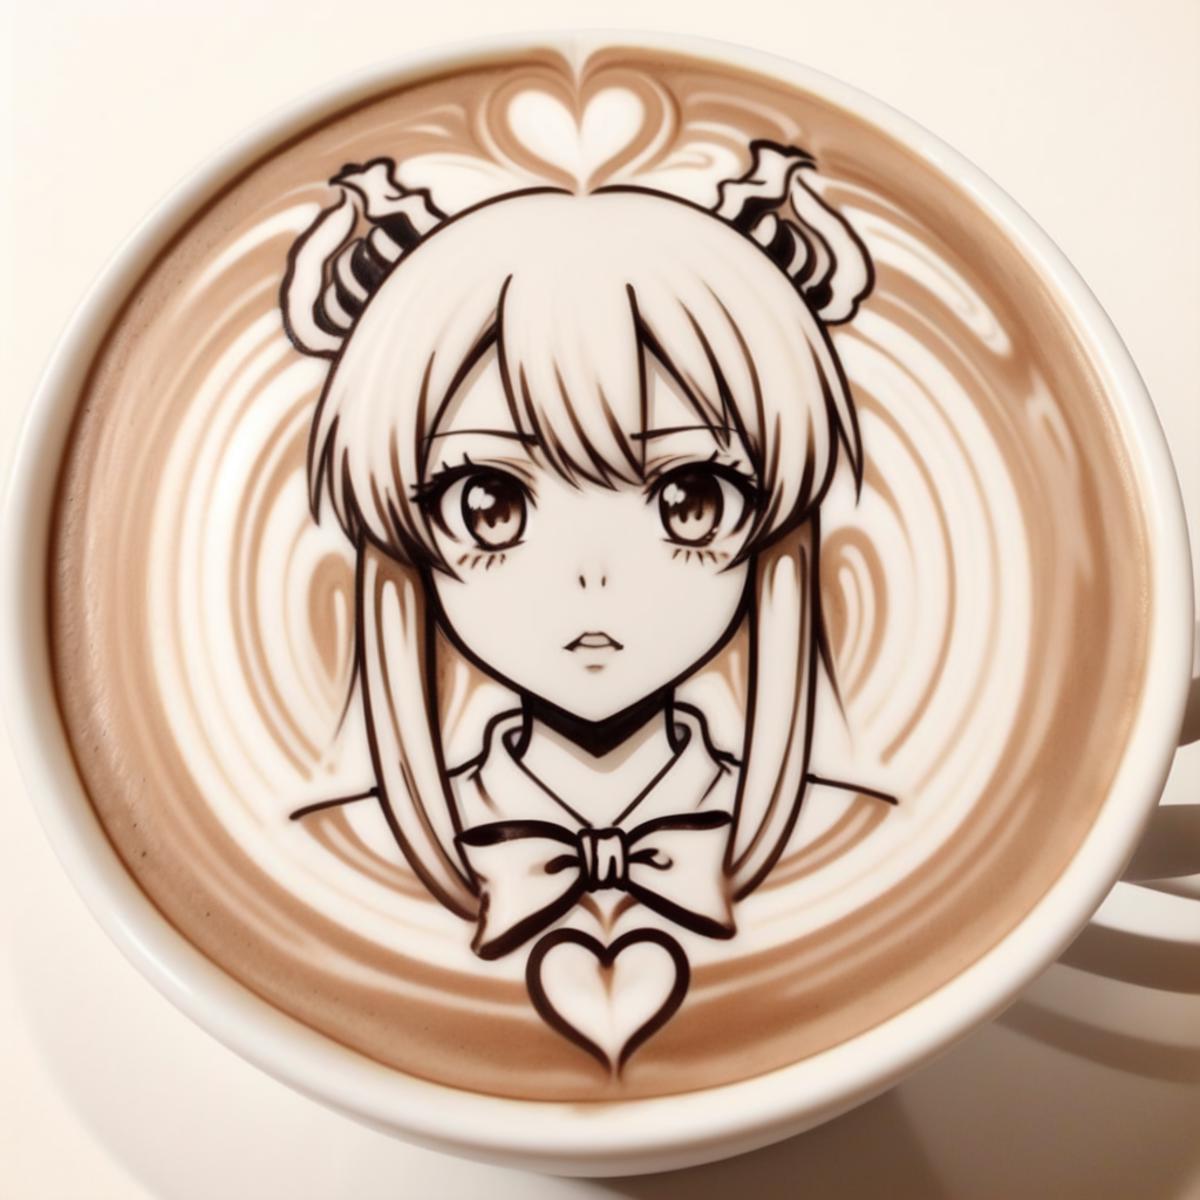 anime character latte art image by Liquidn2